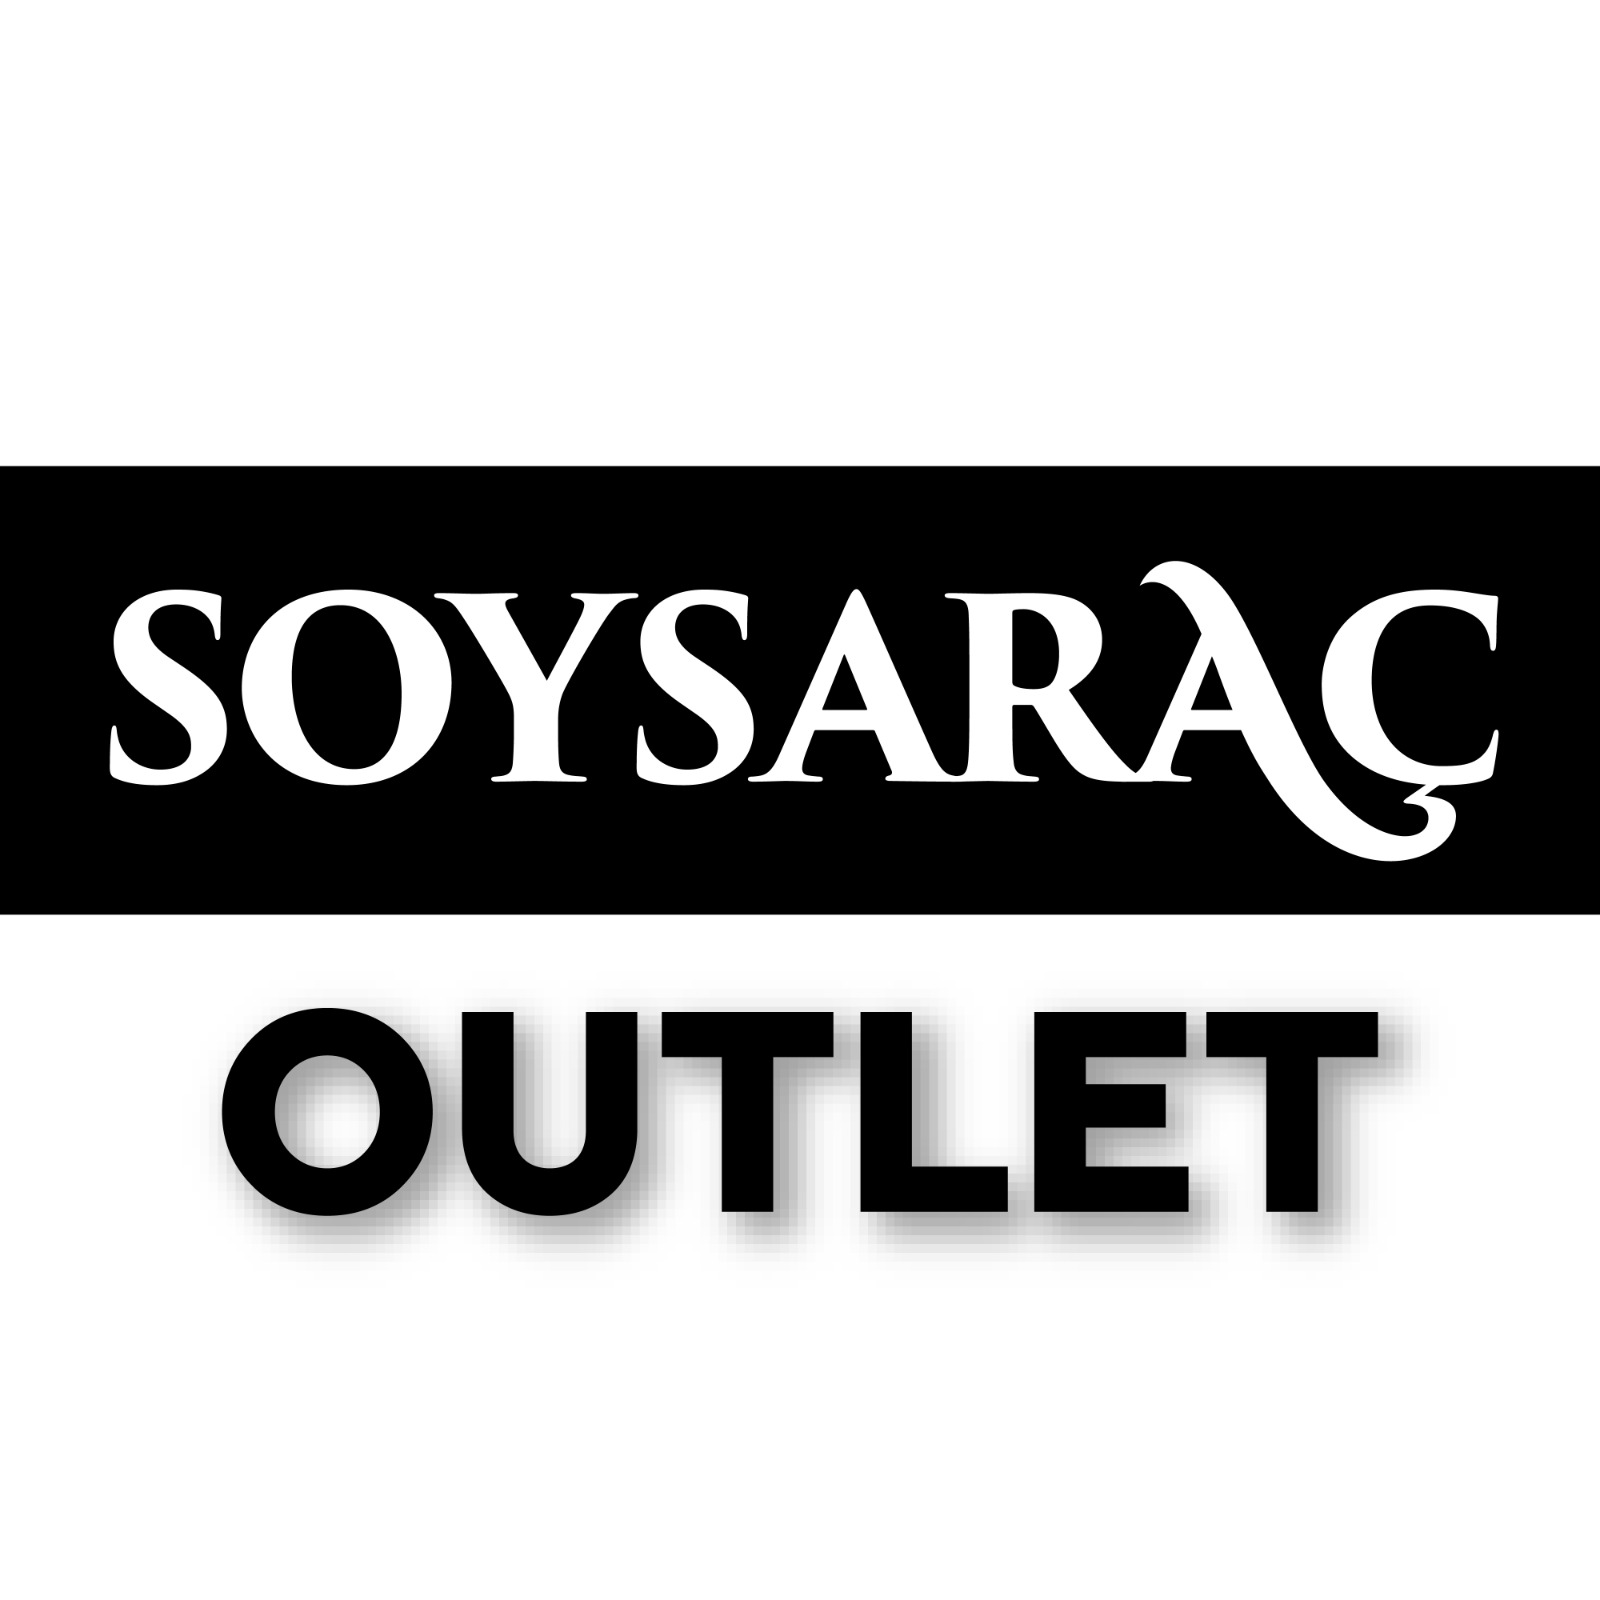 SOYSARACOUTLET